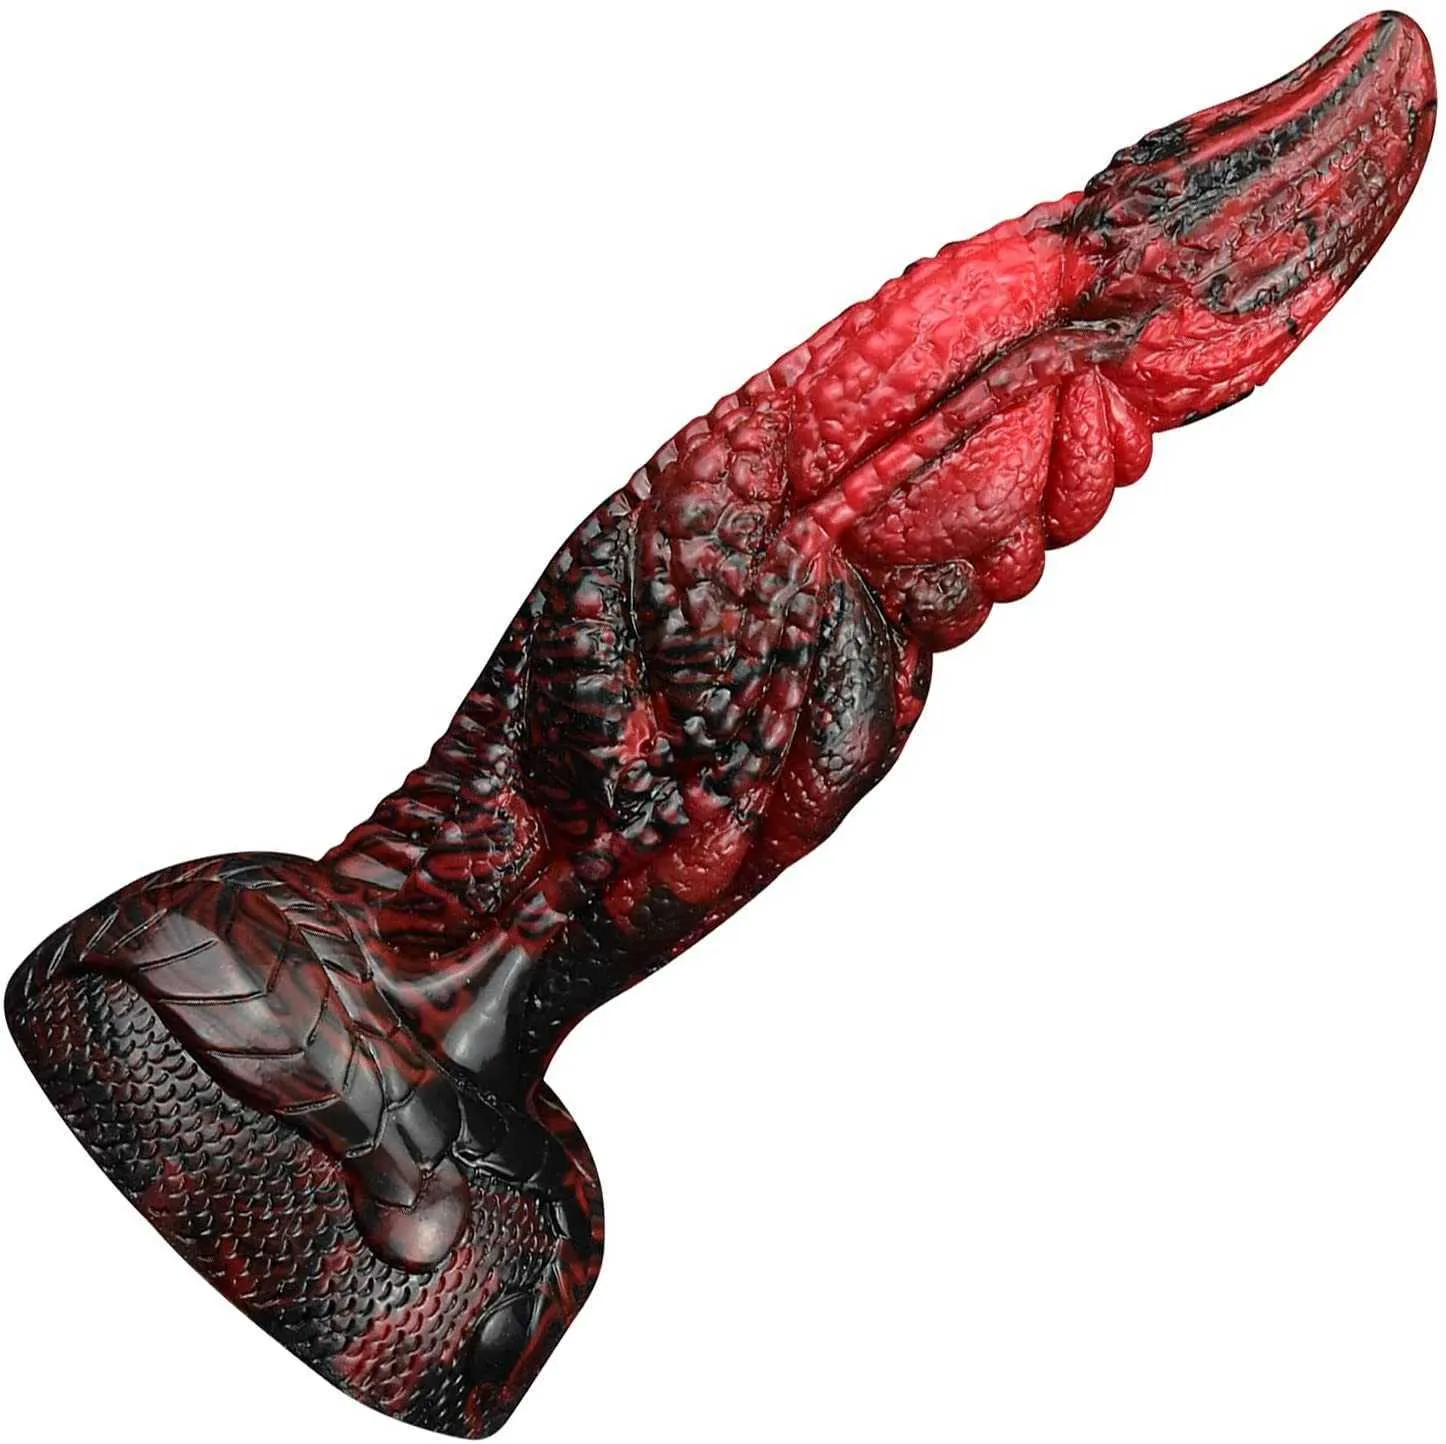 Vibrators Silicone Realistic Dildo strong suction Cup dildo Prostate Massager Large Butt plug Dragon thick anal Sex Toys For Women 1120